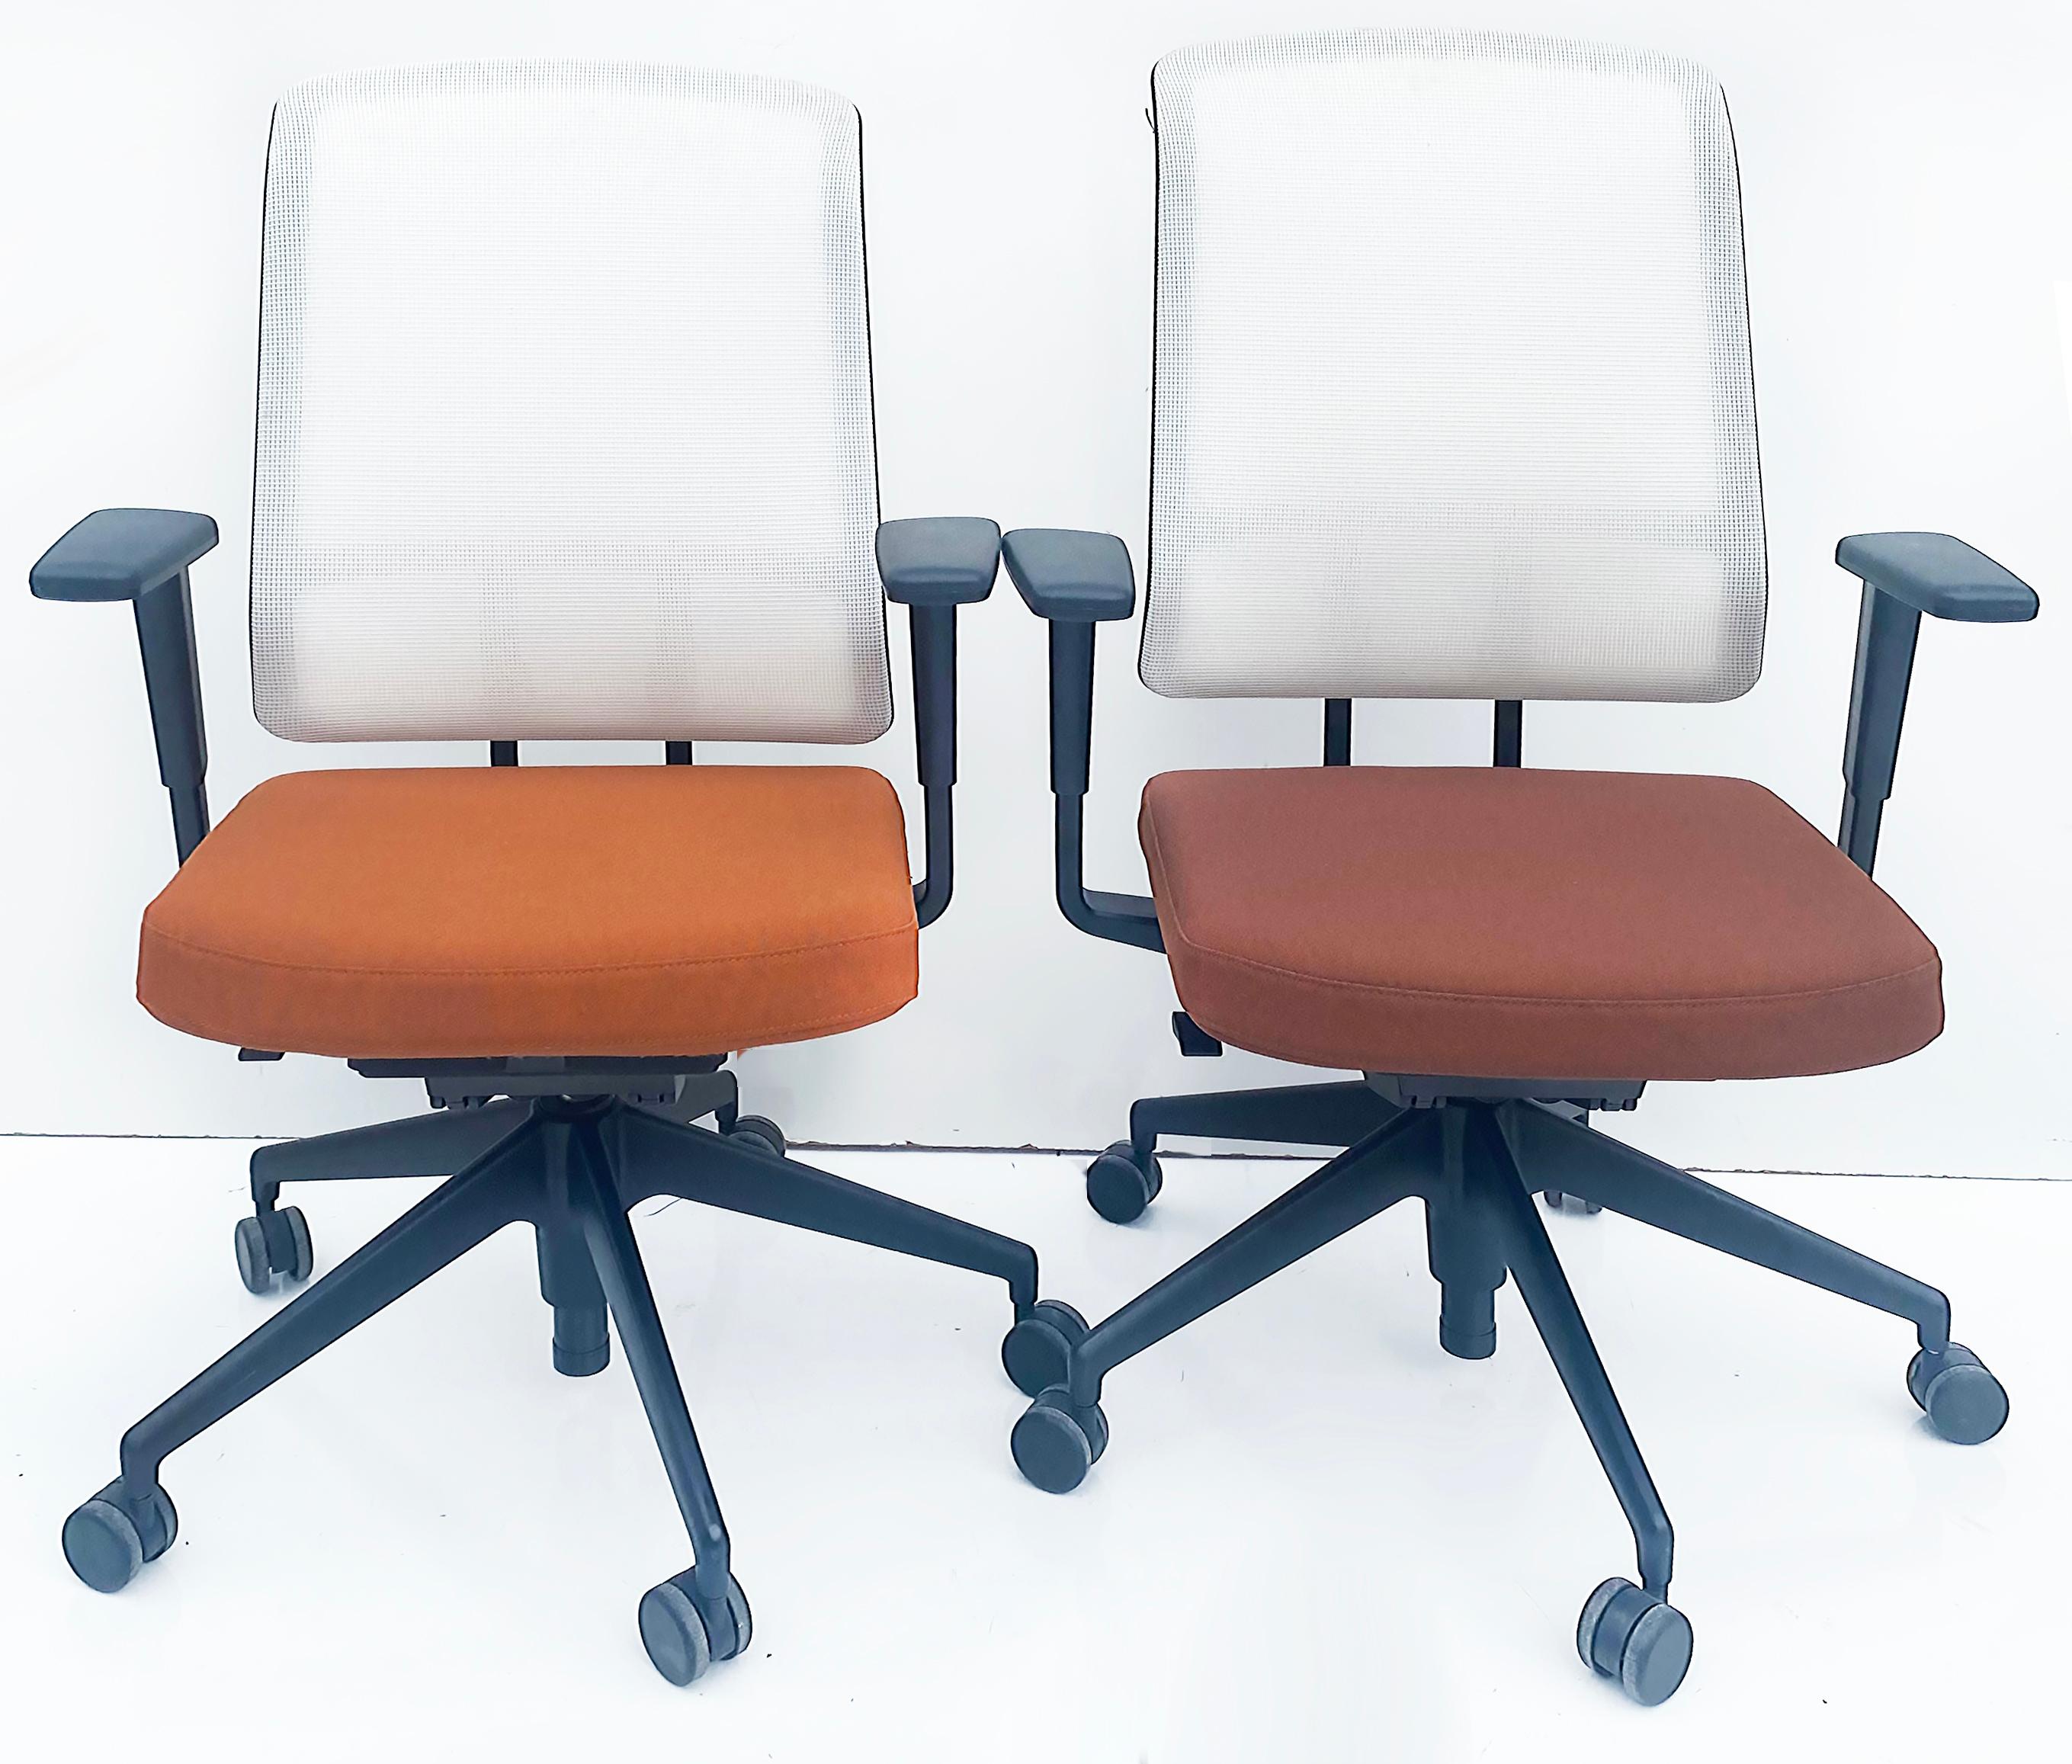 Vitra AM Fully Adjustable Ergonomic Office Chairs by Alberto Meda 2021

Offered for sale individually are six Vitra AM fully adjustable, ergonomic office chairs designed by Alberto Meda and manufactured by Vitra in Germany.  They are priced per